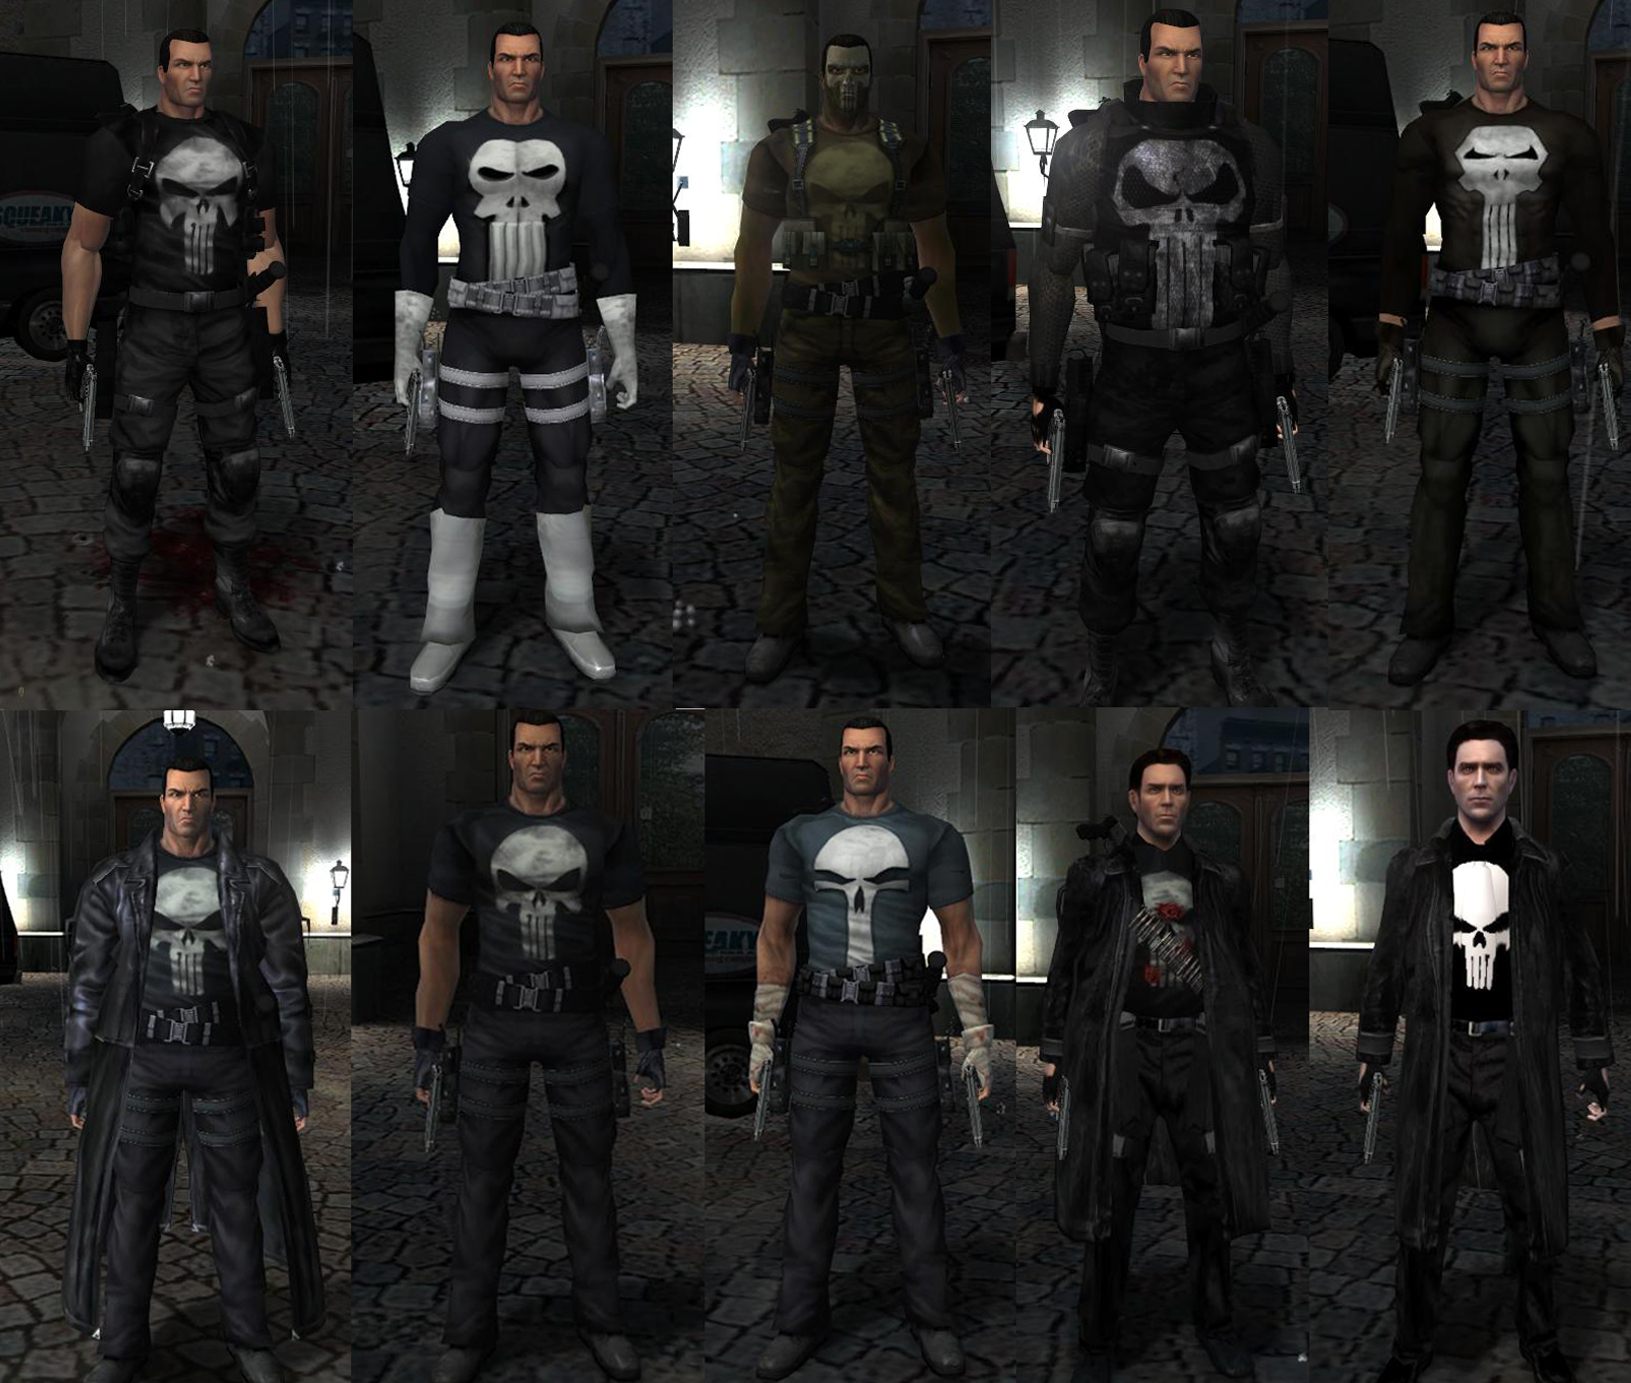 Costume game. The Punisher игра костюмы. Каратель 2005. Каратель 2005 игра костюмы.